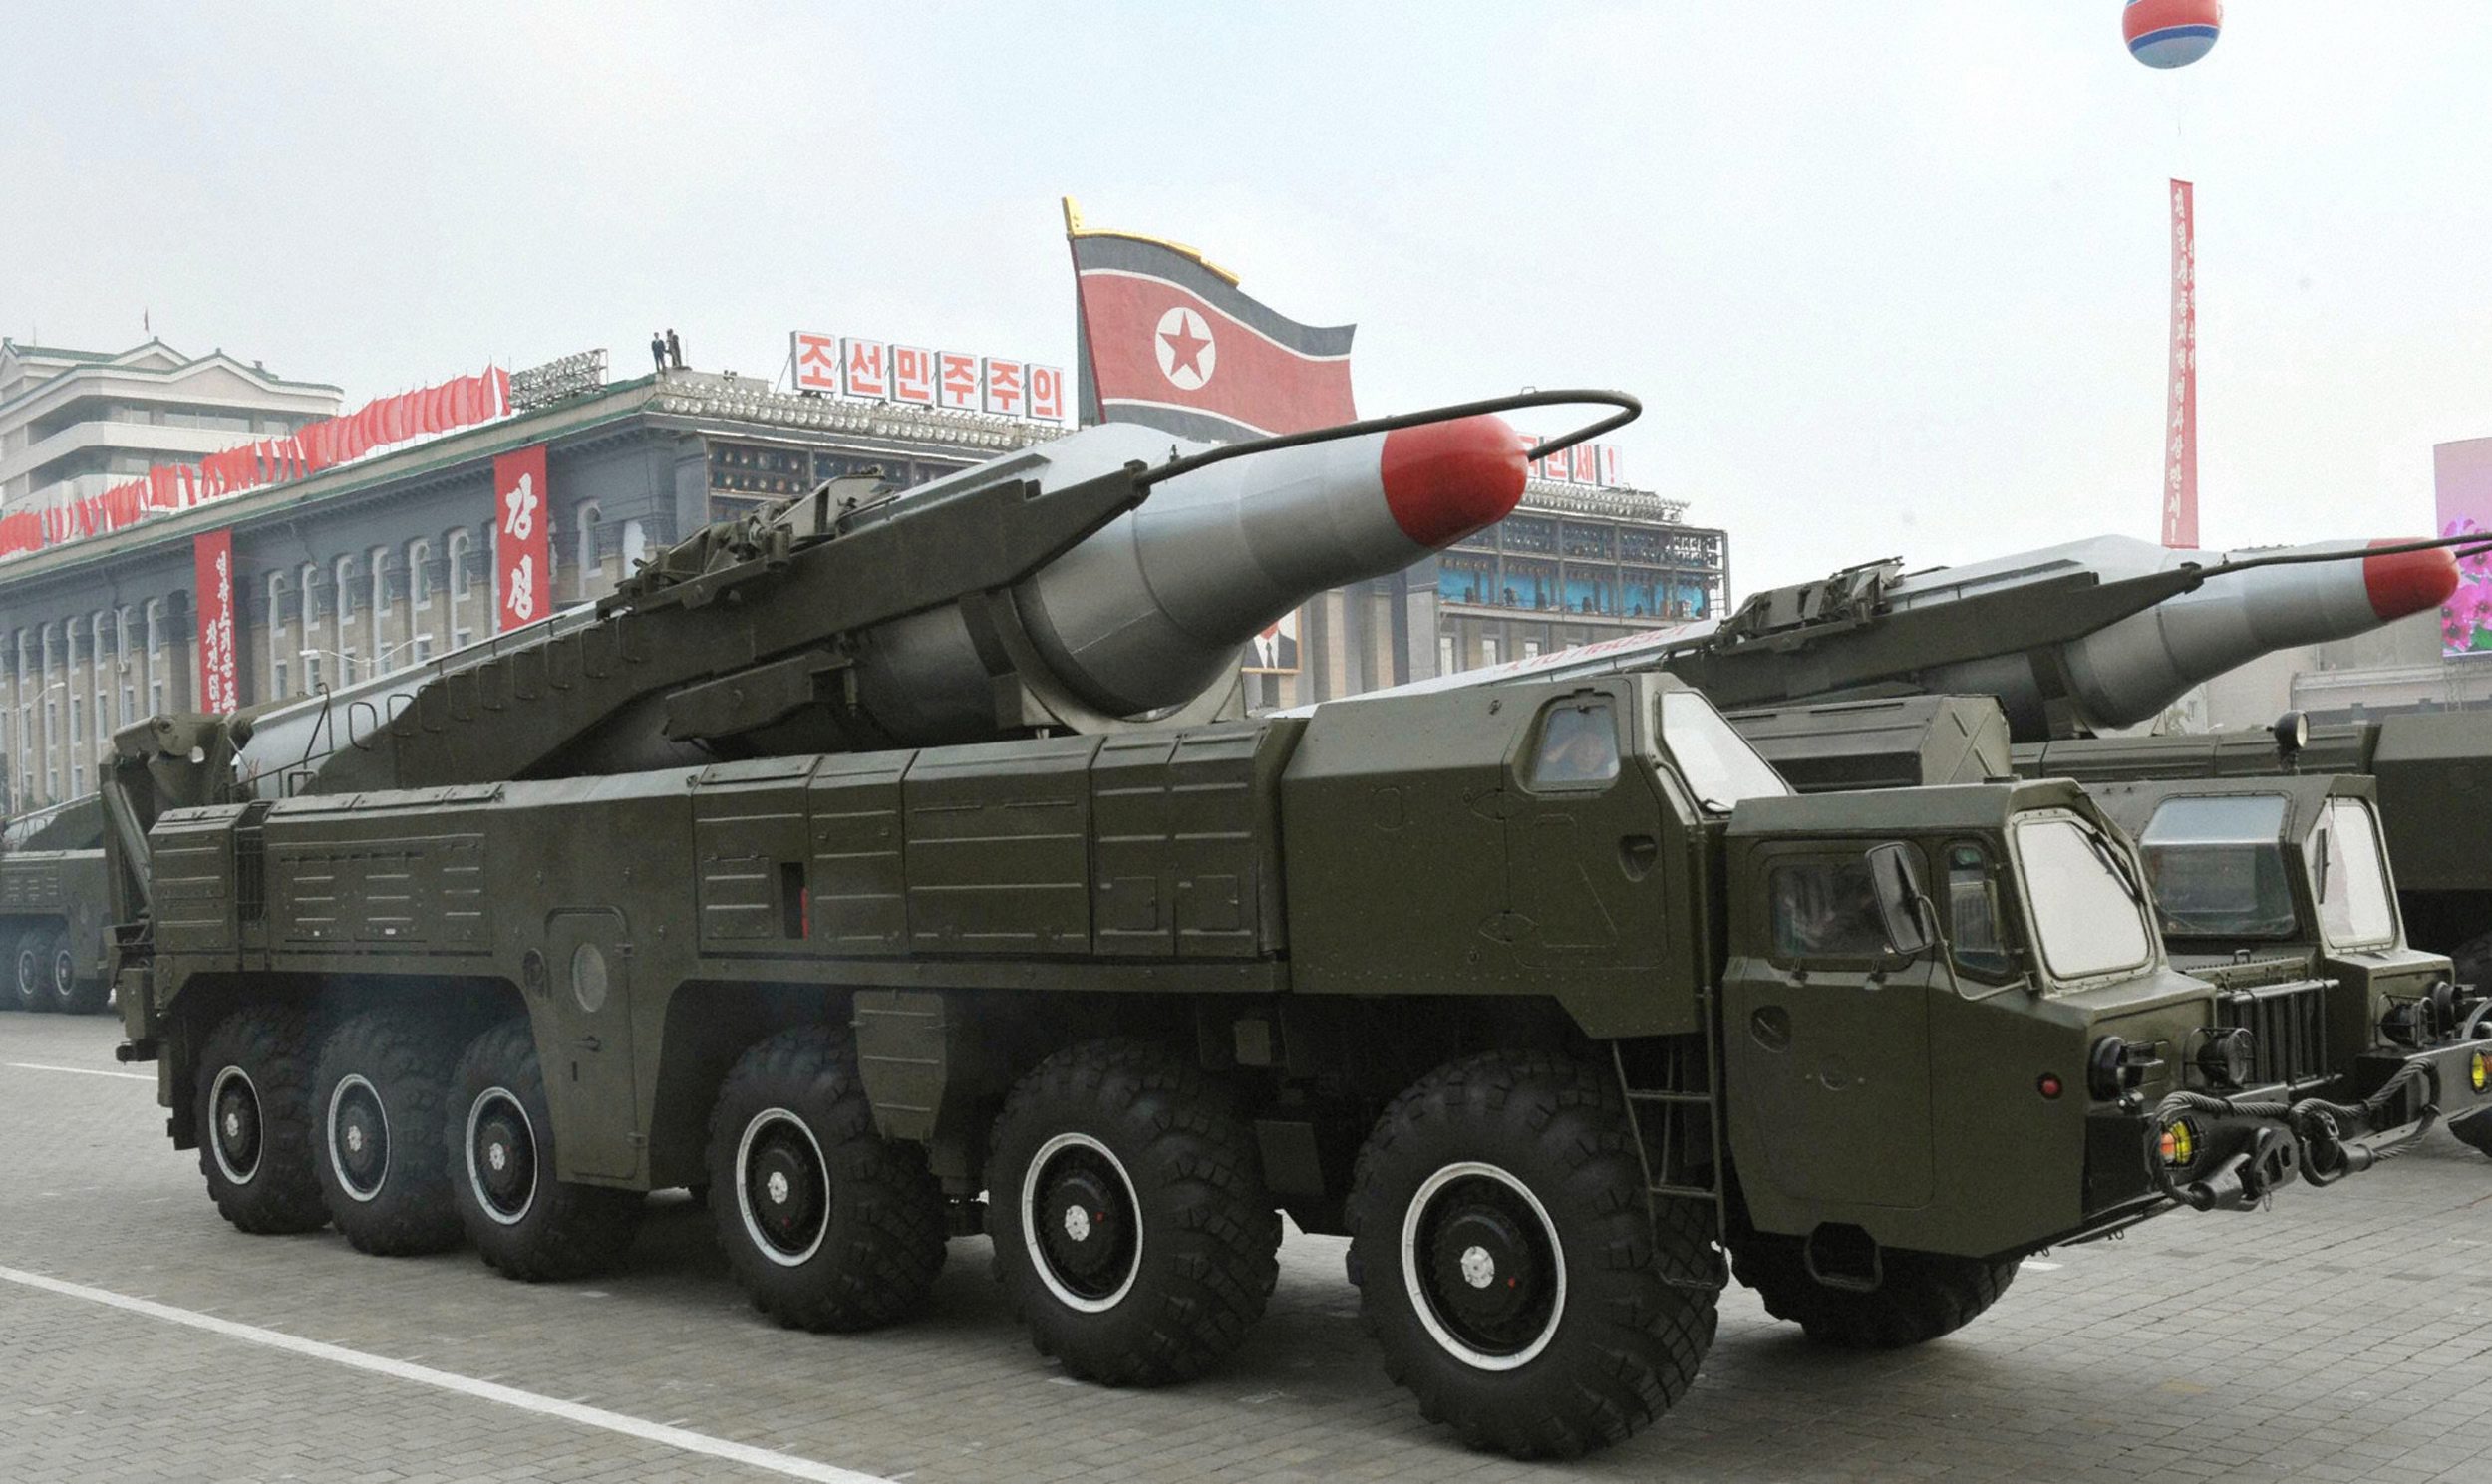 PHOTO: A photo made available by the North Korean Central News Agency shows a Musudan missile displayed during a military parade marking the 65th anniversary of the foundation of the Workers' Party of Korea, in Pyongyang, North Korea, 2010.